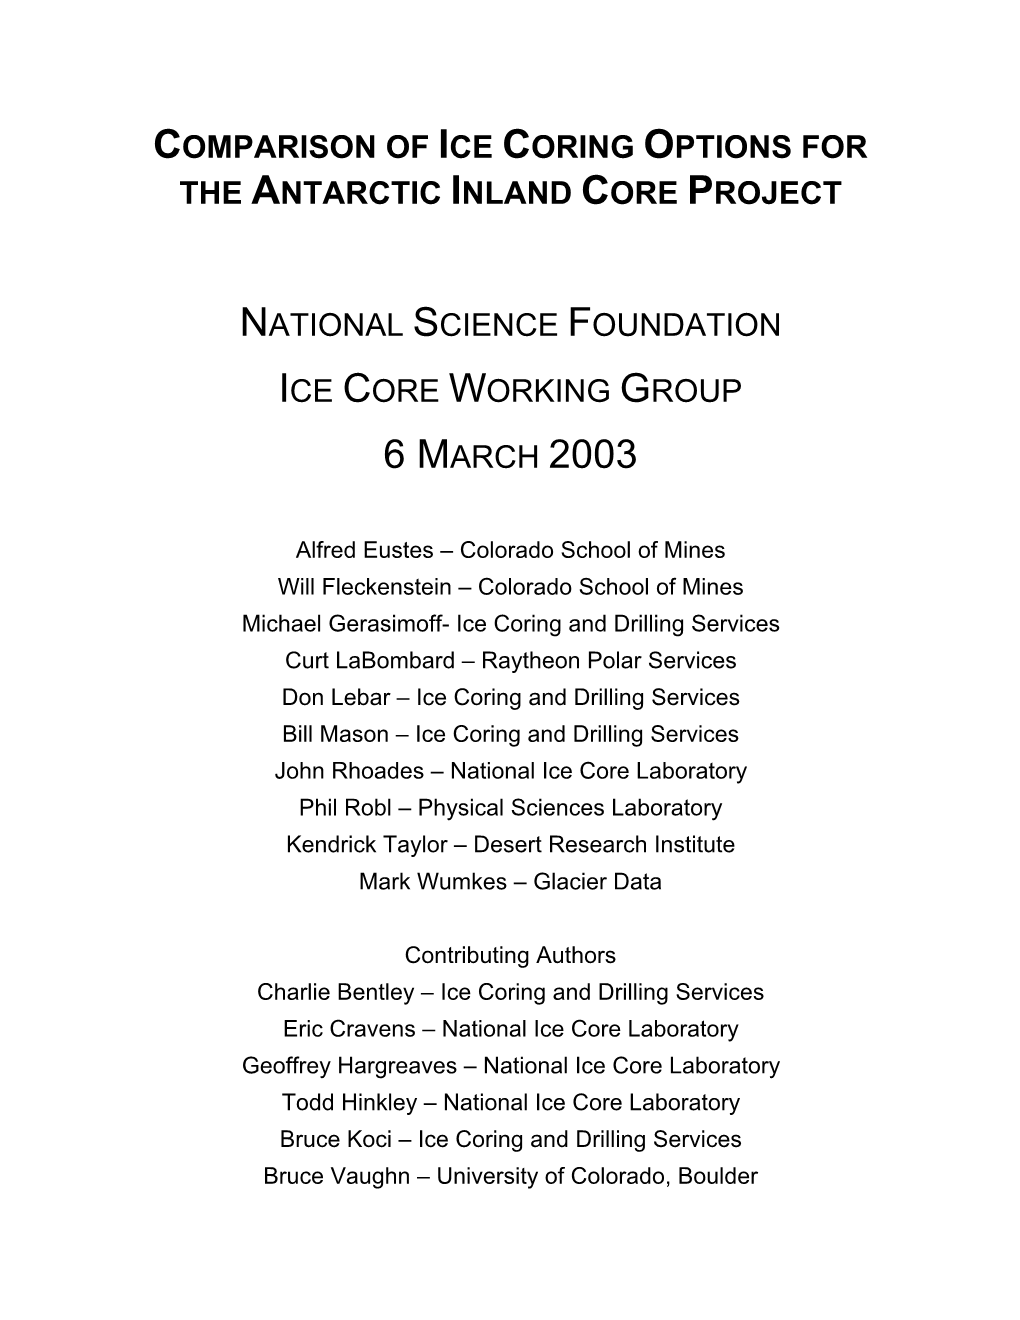 Comparison of Ice Coring Options for the Antarctic Inland Core Project